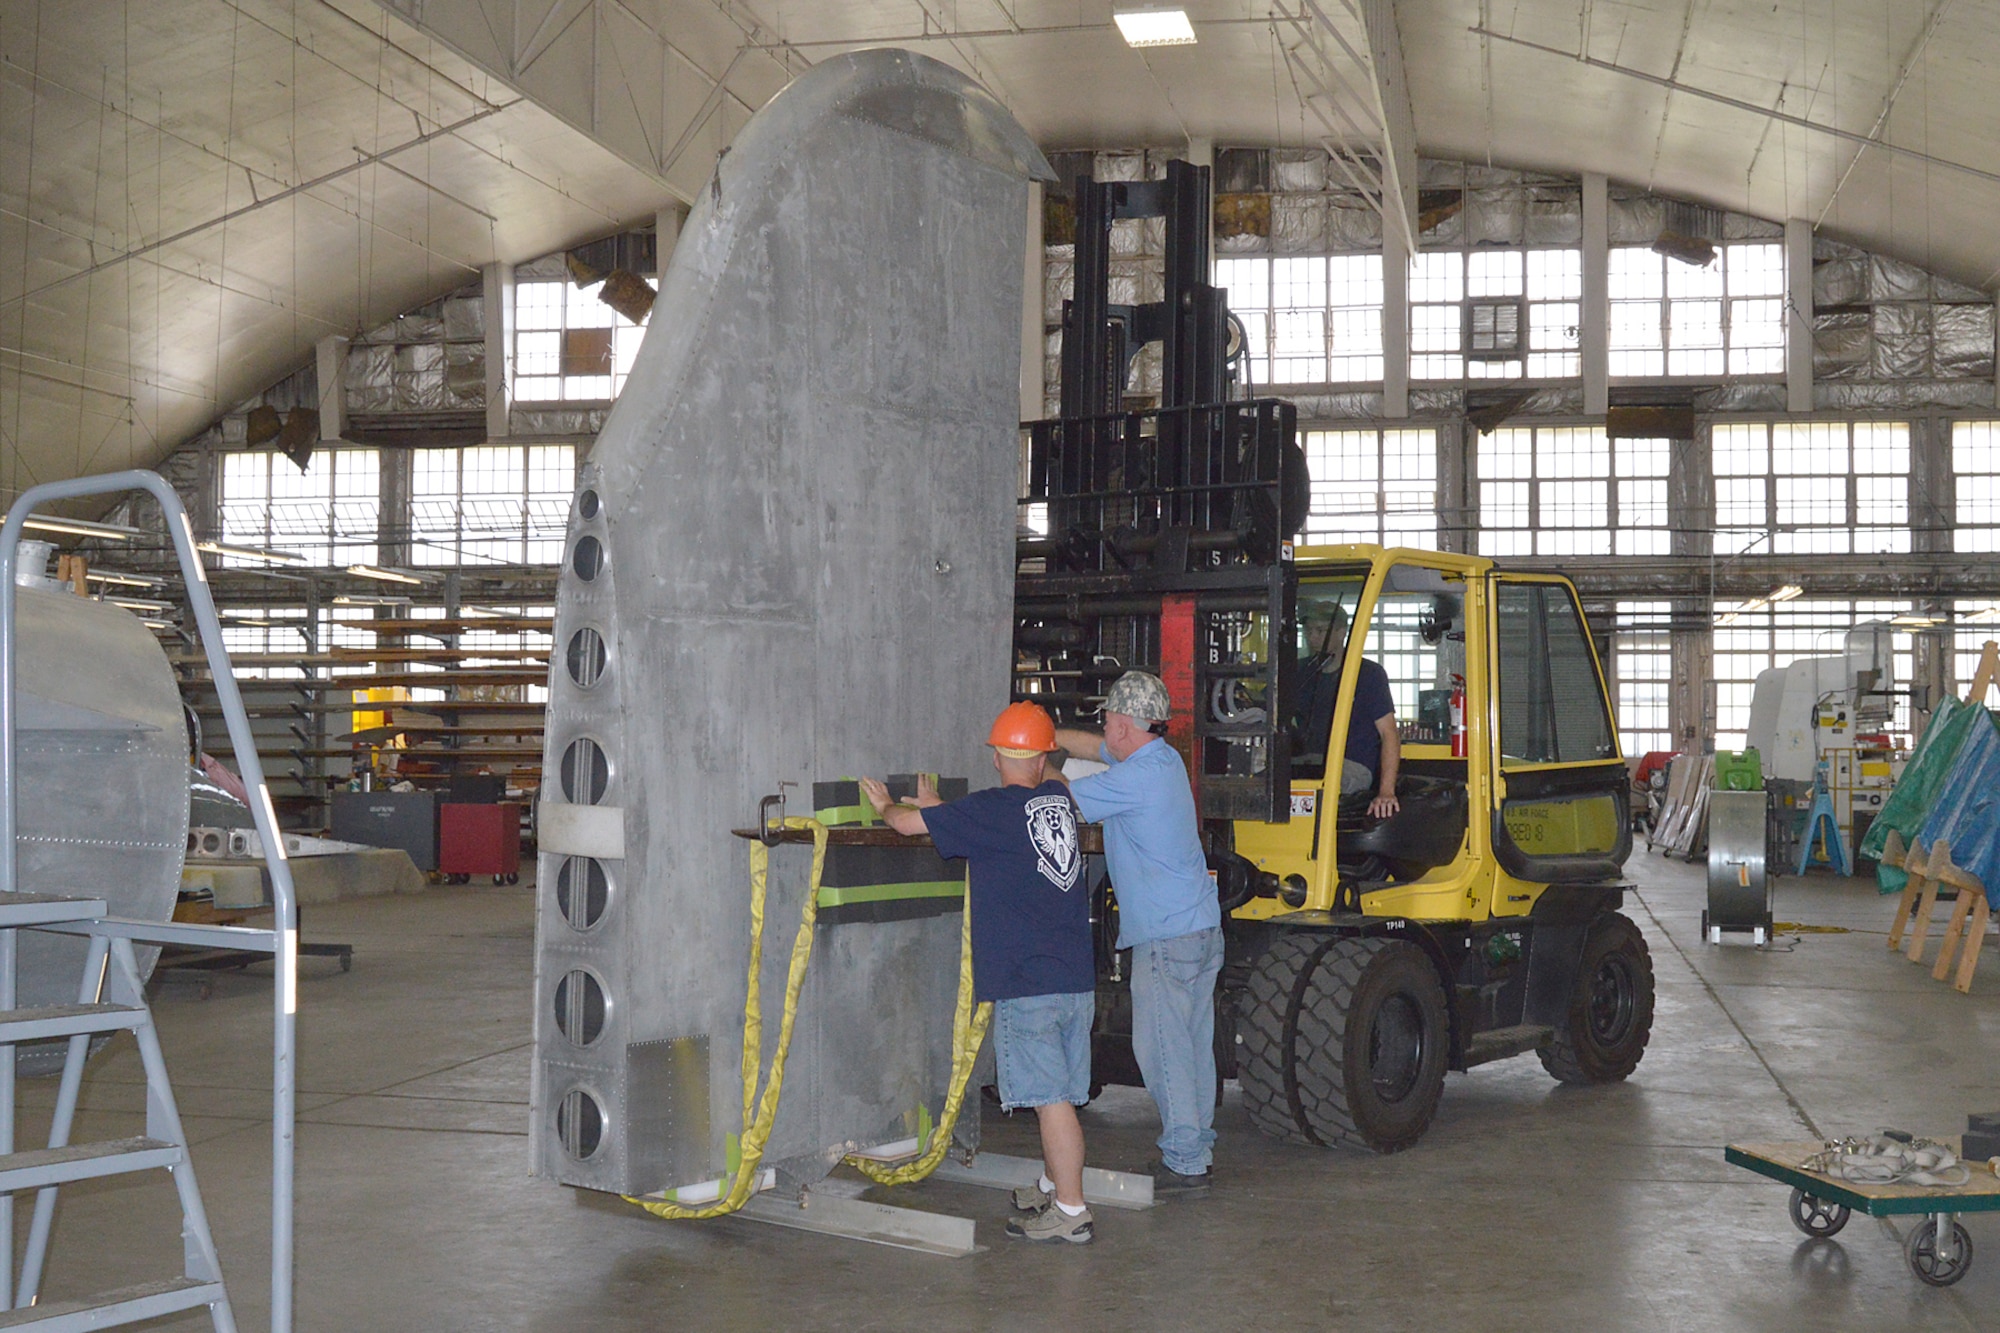 DAYTON, Ohio (08/2014) -- (From left to right) Restoration Specialists Duane Jones, Roger Brigner, and Chad Vanhook prepare to attach the vertical stabilizer to the fuselage of the B-17F "Memphis Belle"® at the museum's restoration hangar. Plans call for the aircraft to be placed on display in the museum's World War II Gallery in spring 2018. (U.S. Air Force photo)